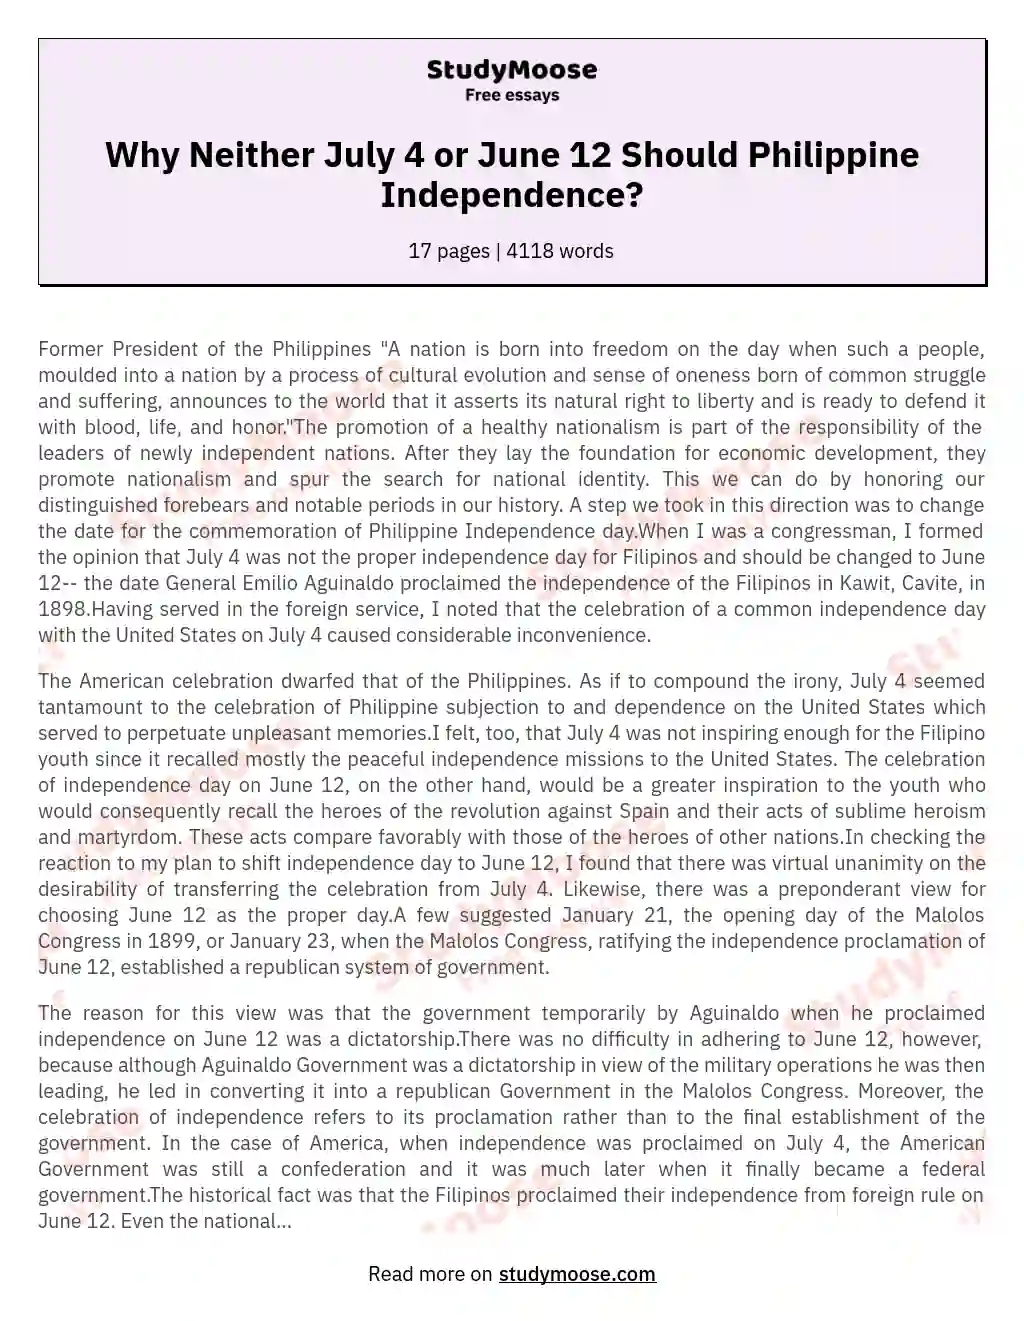 Why Neither July 4 or June 12 Should Philippine Independence? essay